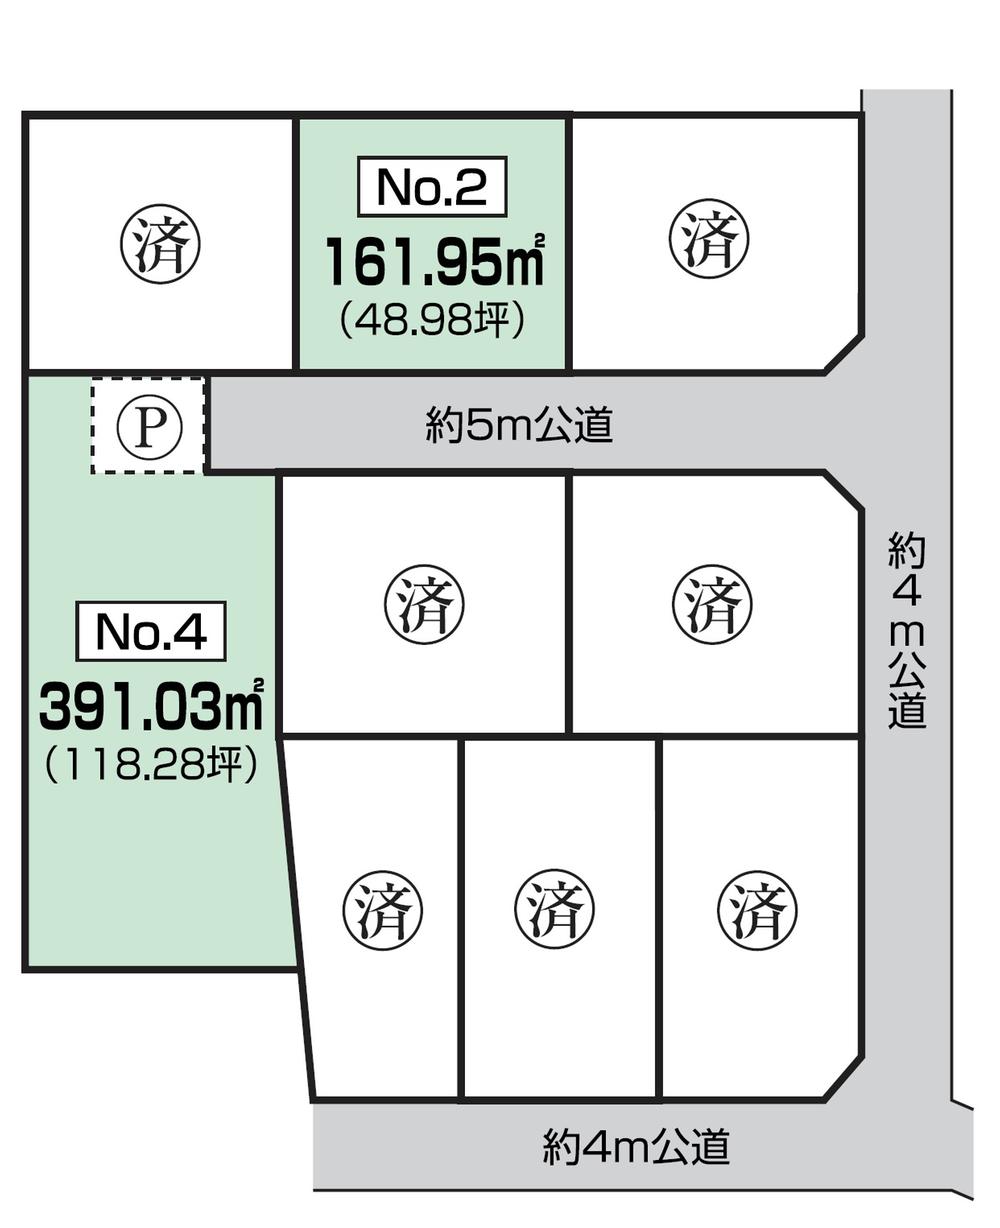 Compartment figure. Land price 10 million yen, !! For those looking for a land area 161.95 sq m wide land